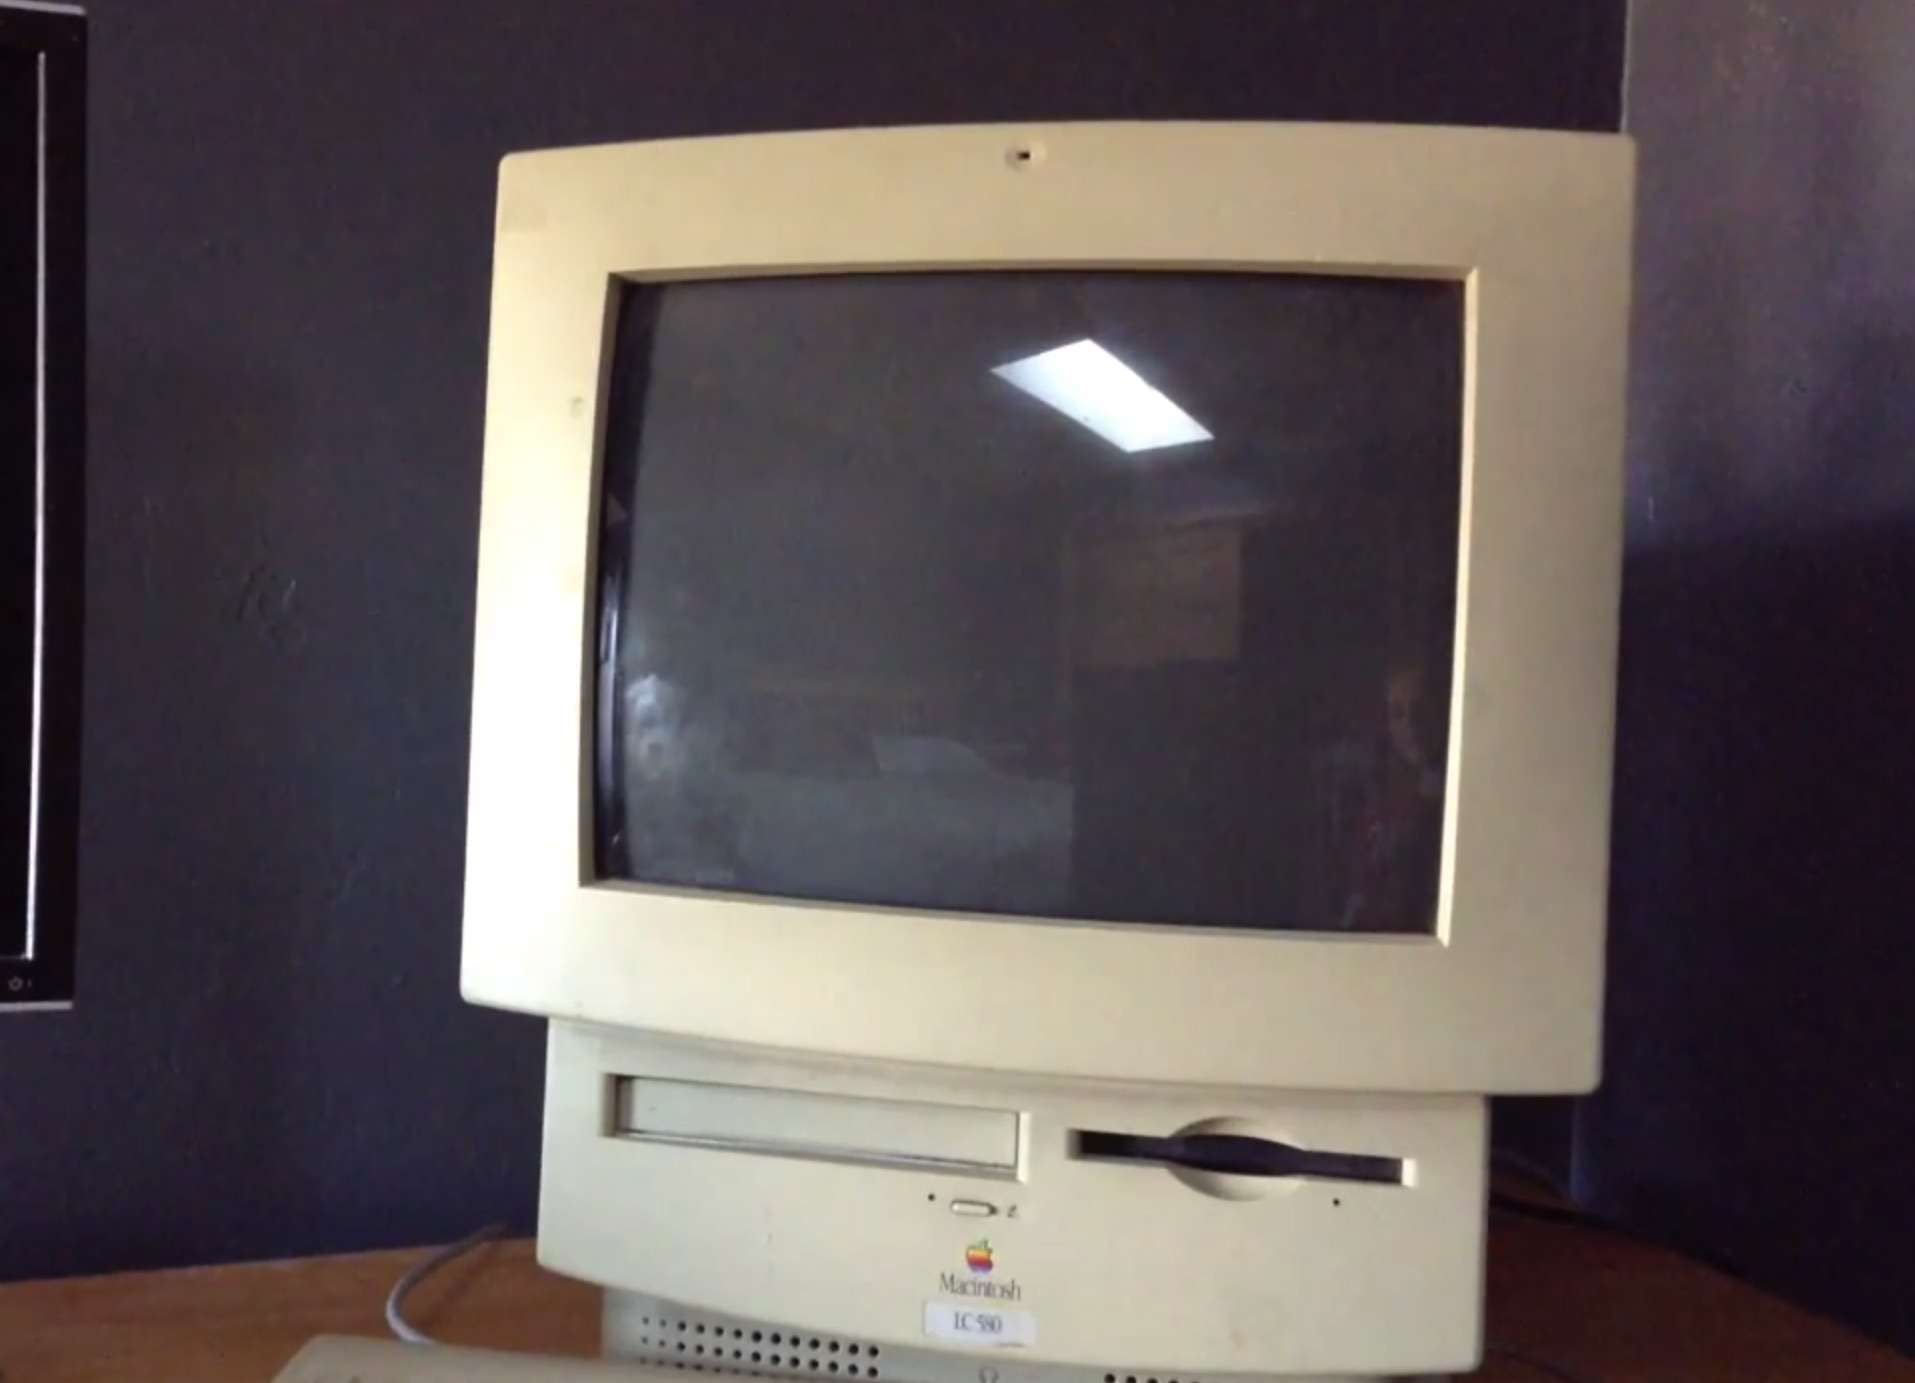 The Macintosh LC 580 blew away PCs when it came to multimedia performance.